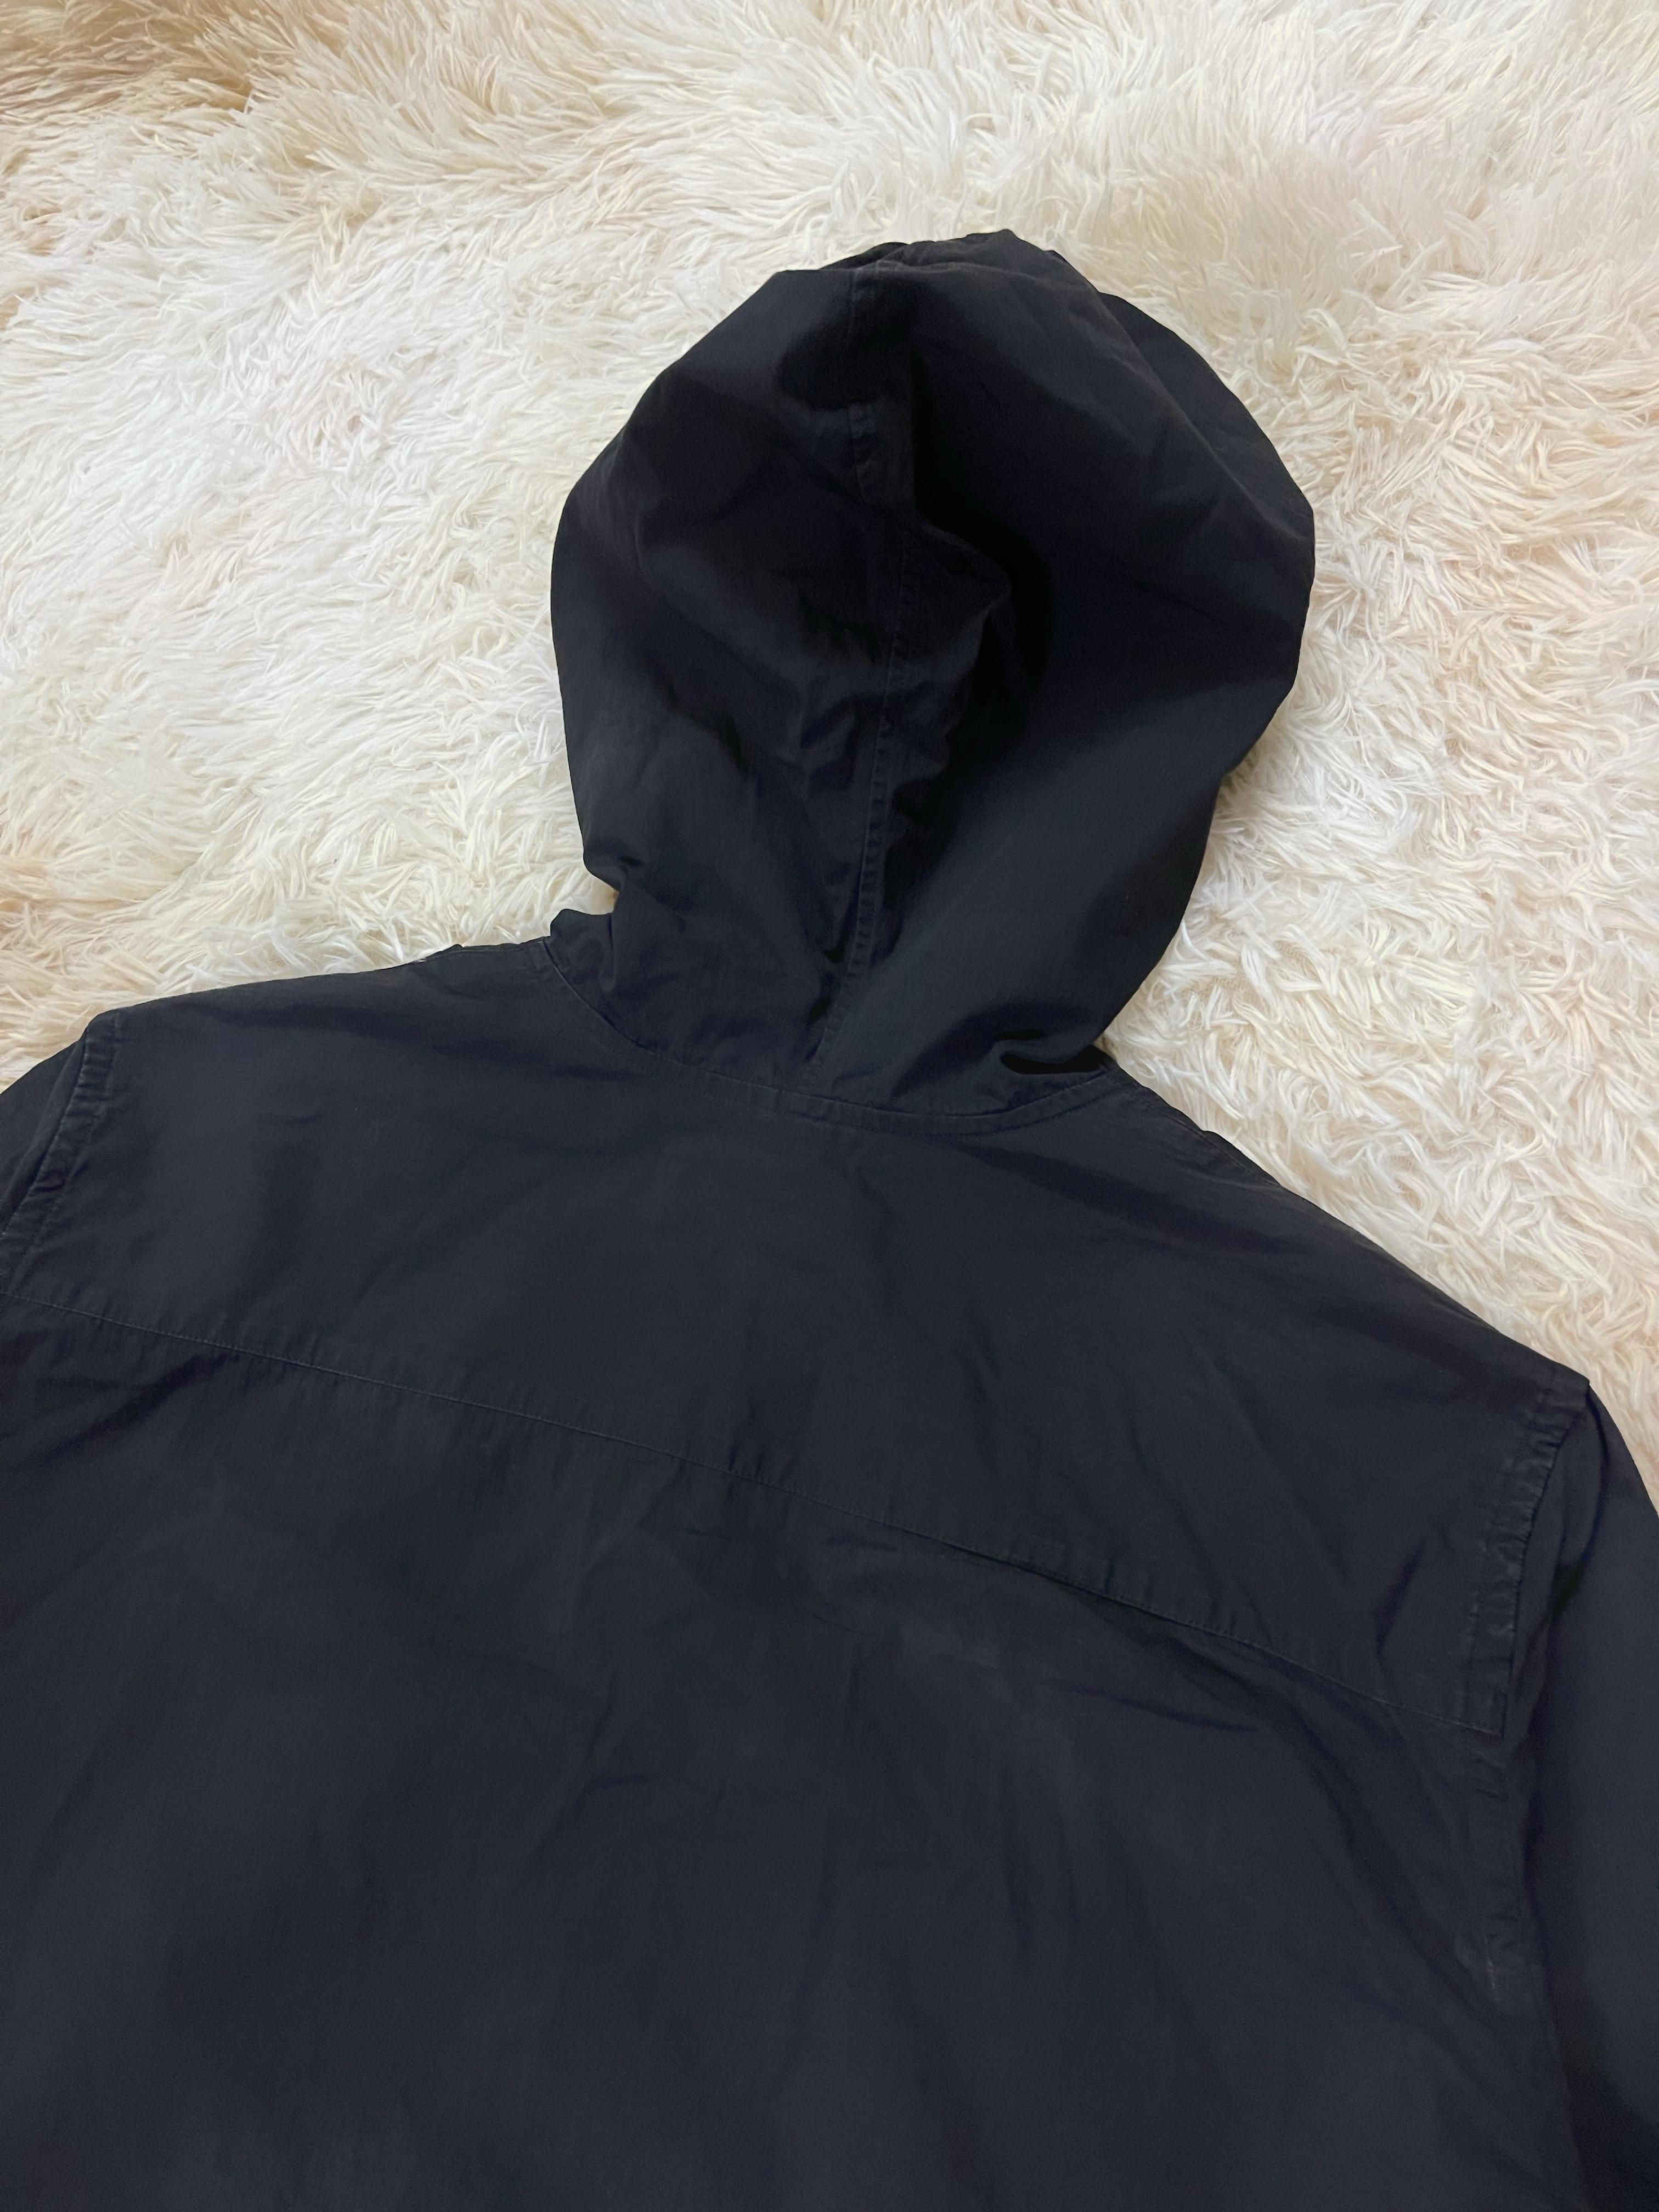 Marni S/S2014 Hooded Nylon Shirt In Good Condition In Seattle, WA